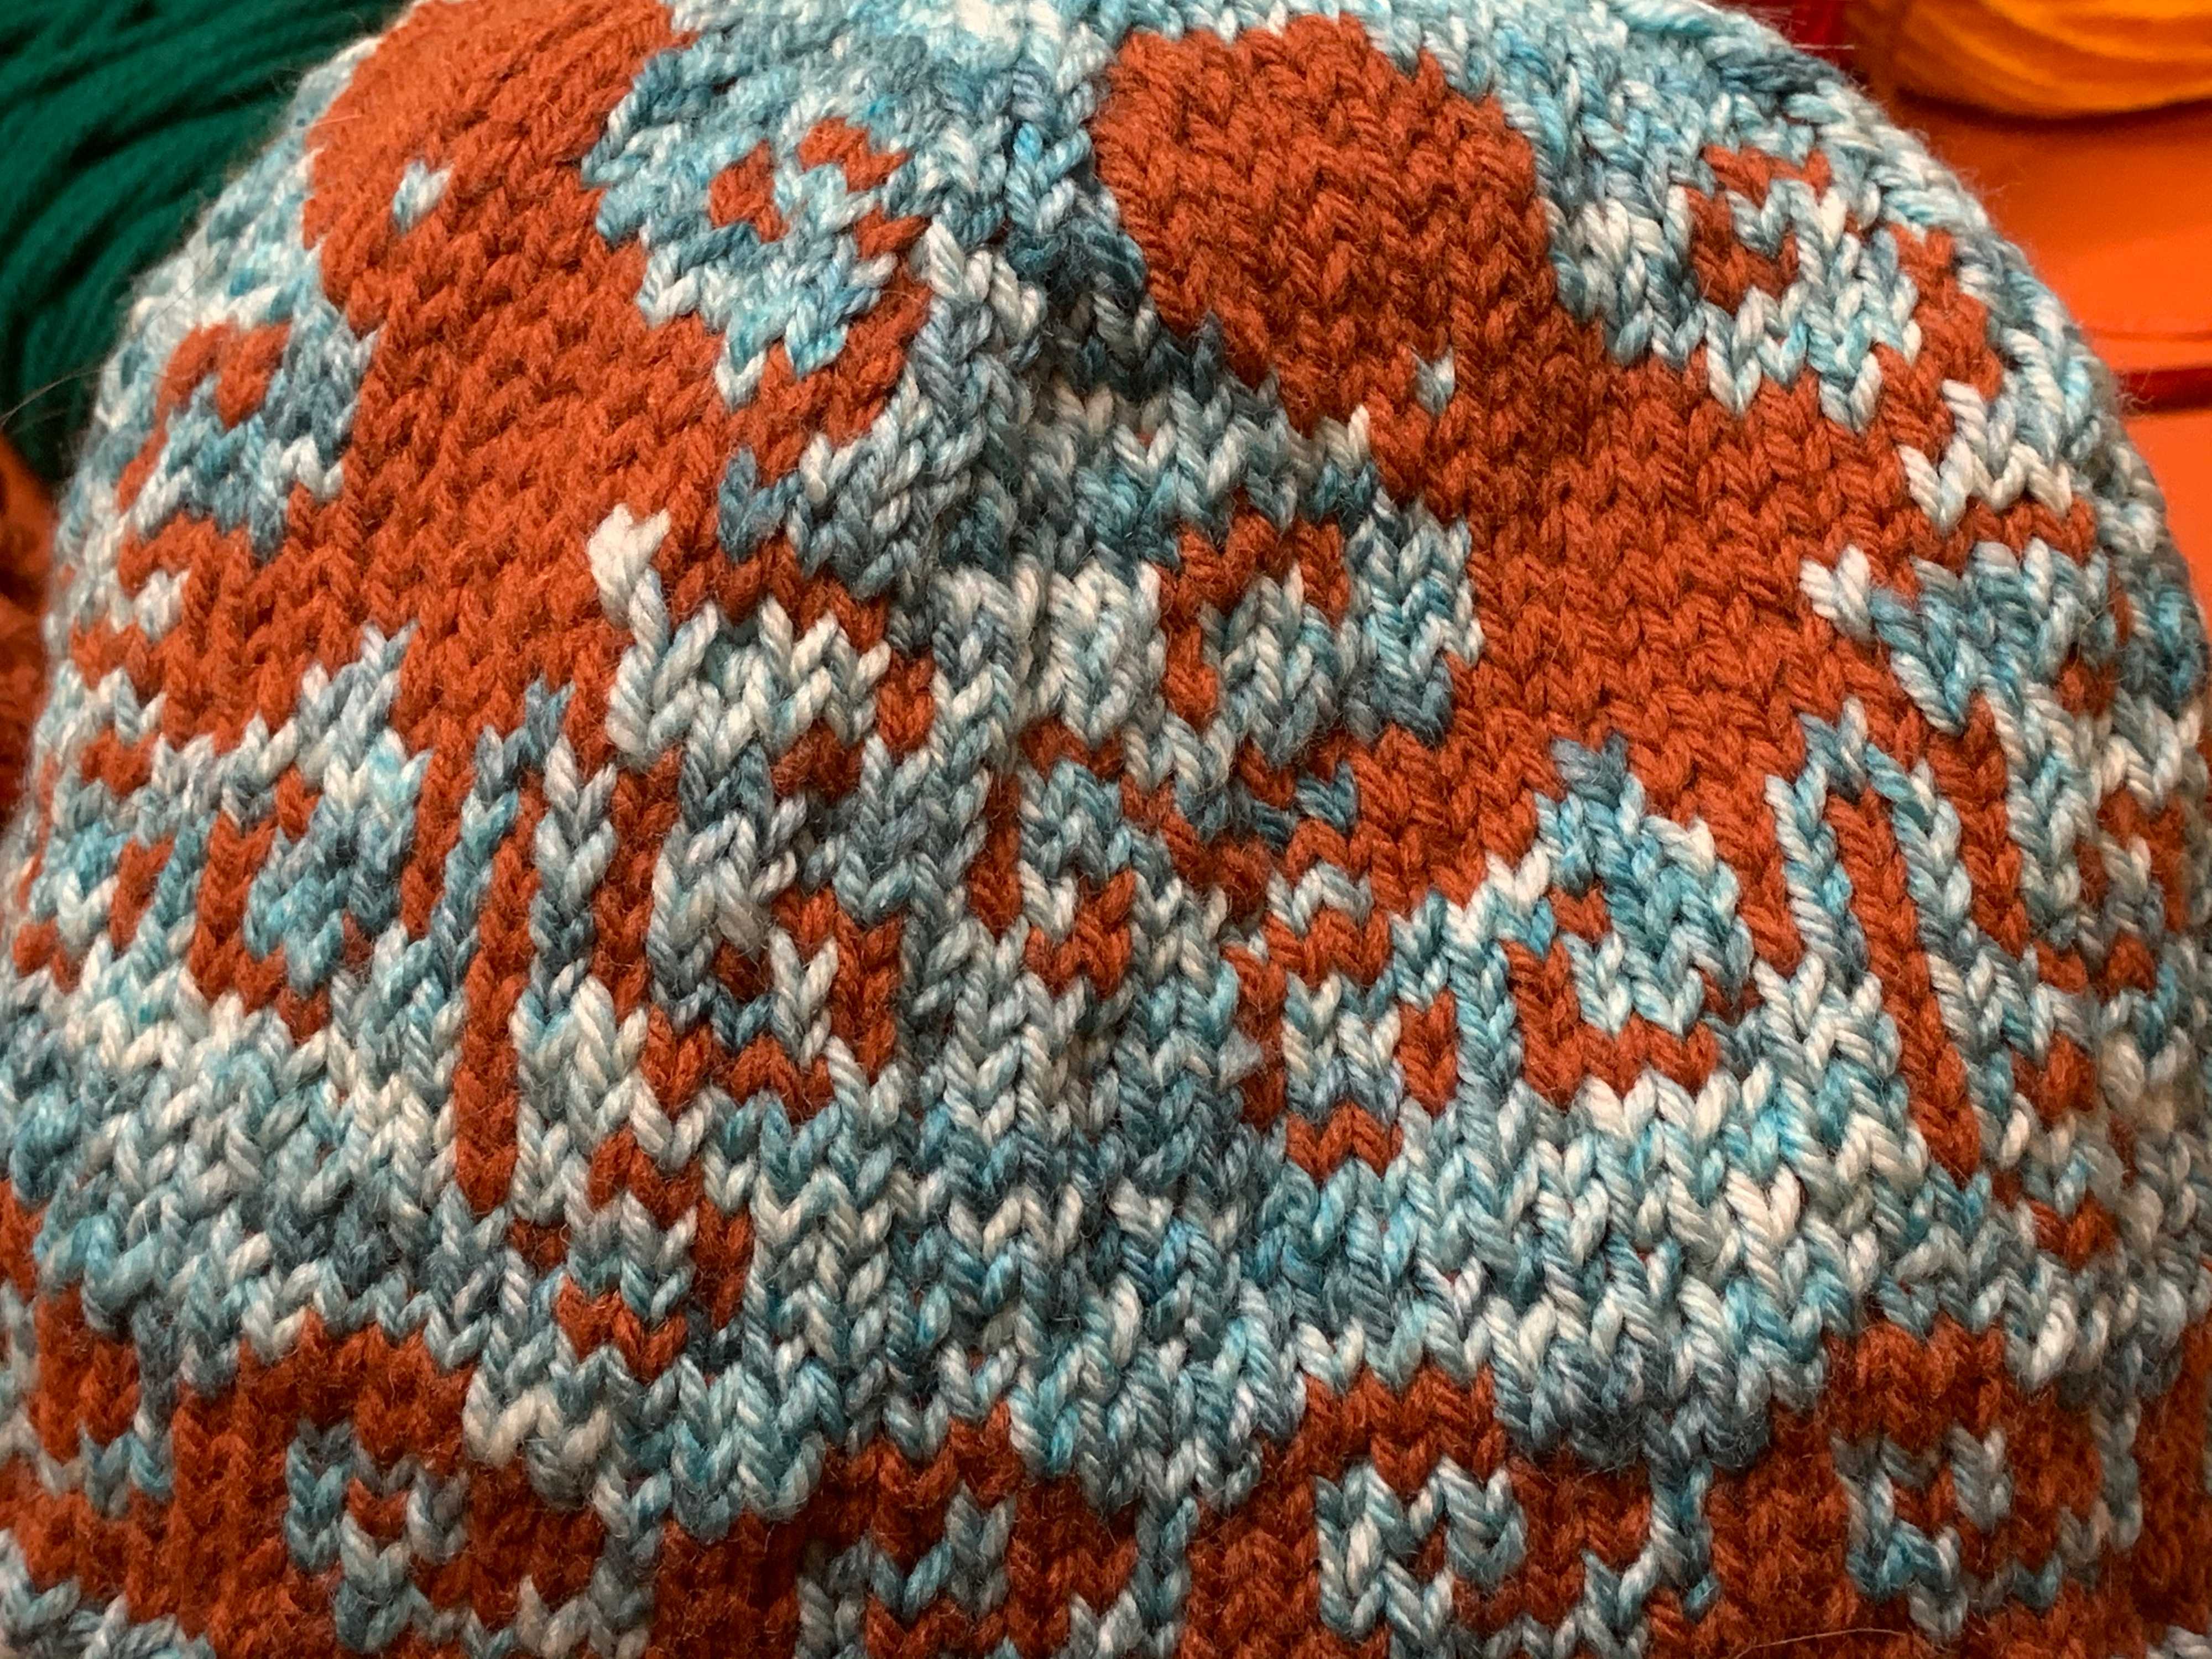 Stranded colorwork hat depicting orange octopi on a blue background. There are large gaps of blue between the octopi.